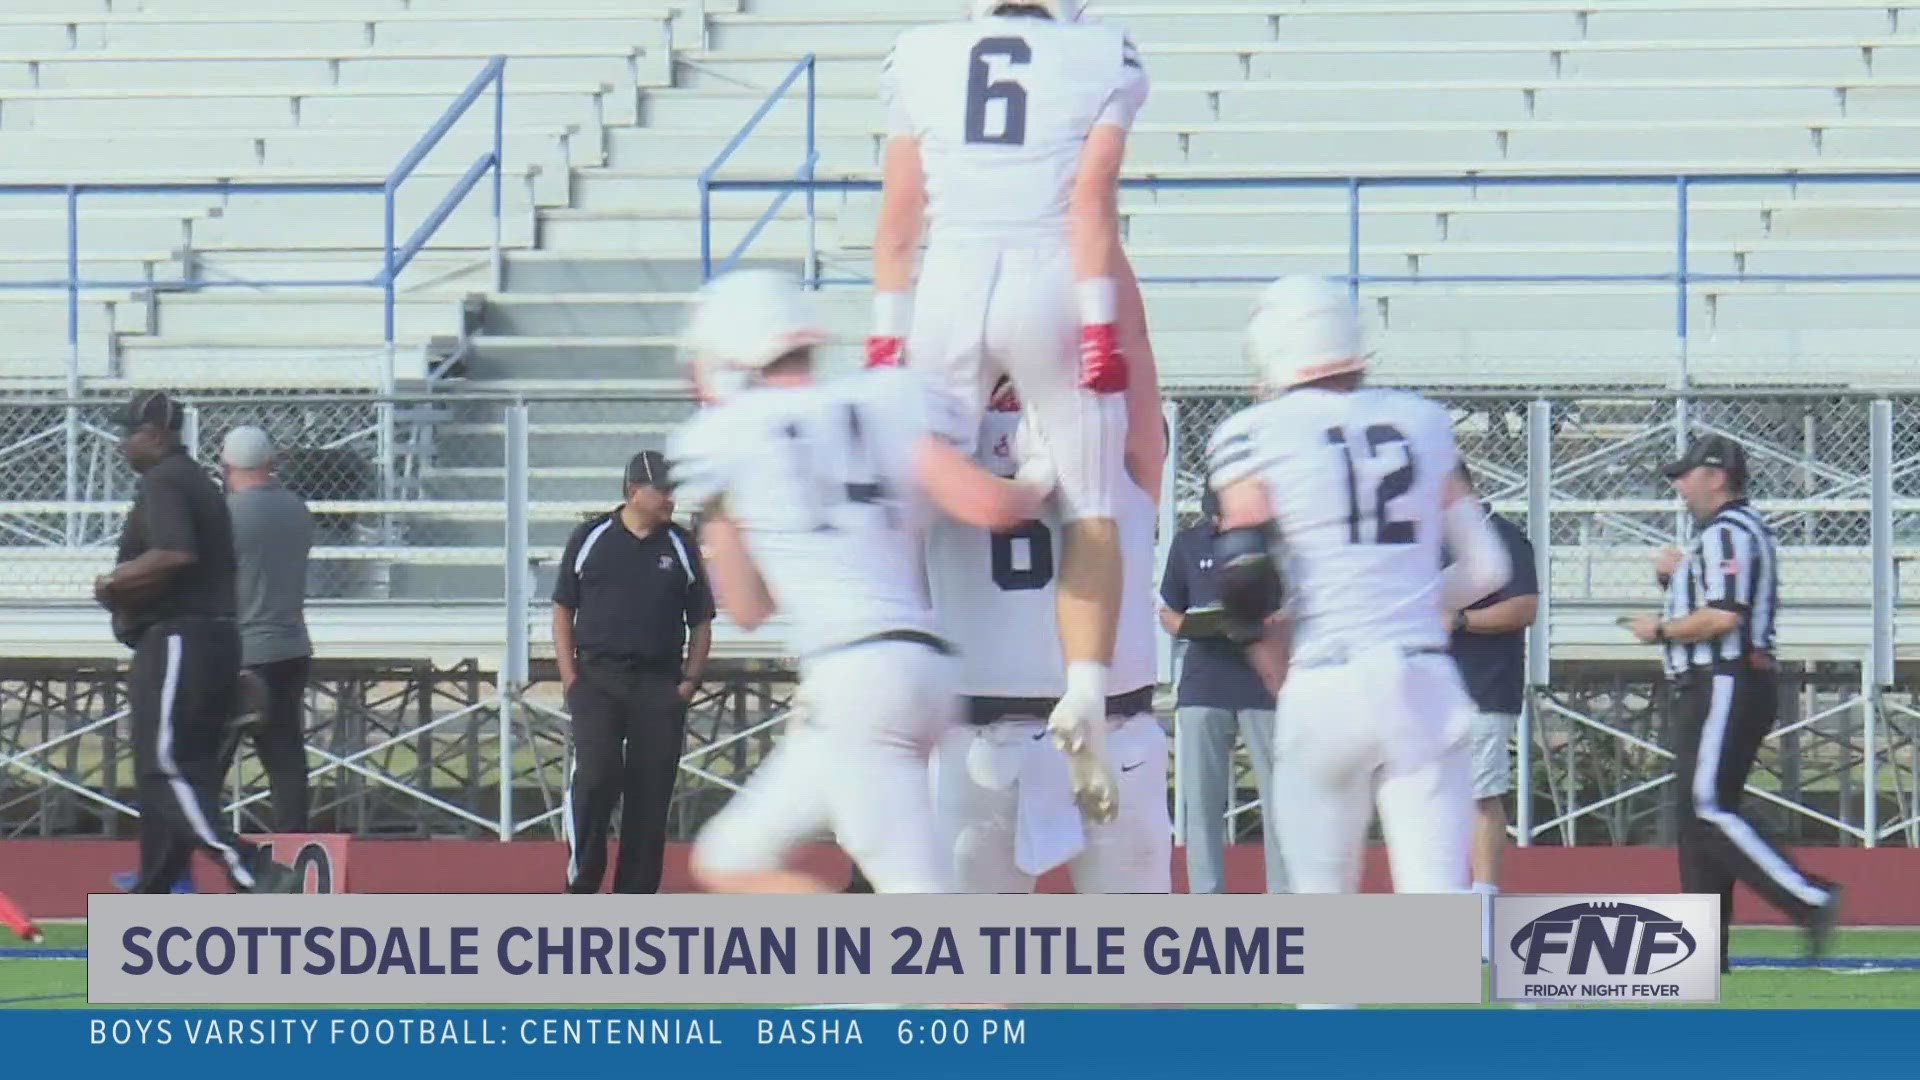 The 2A state championship between #3 Scottsdale Christian and #1 Pima is on Saturday! Kickoff is at 2 p.m. at Mtn. Pointe HS in PHX and here is a preview